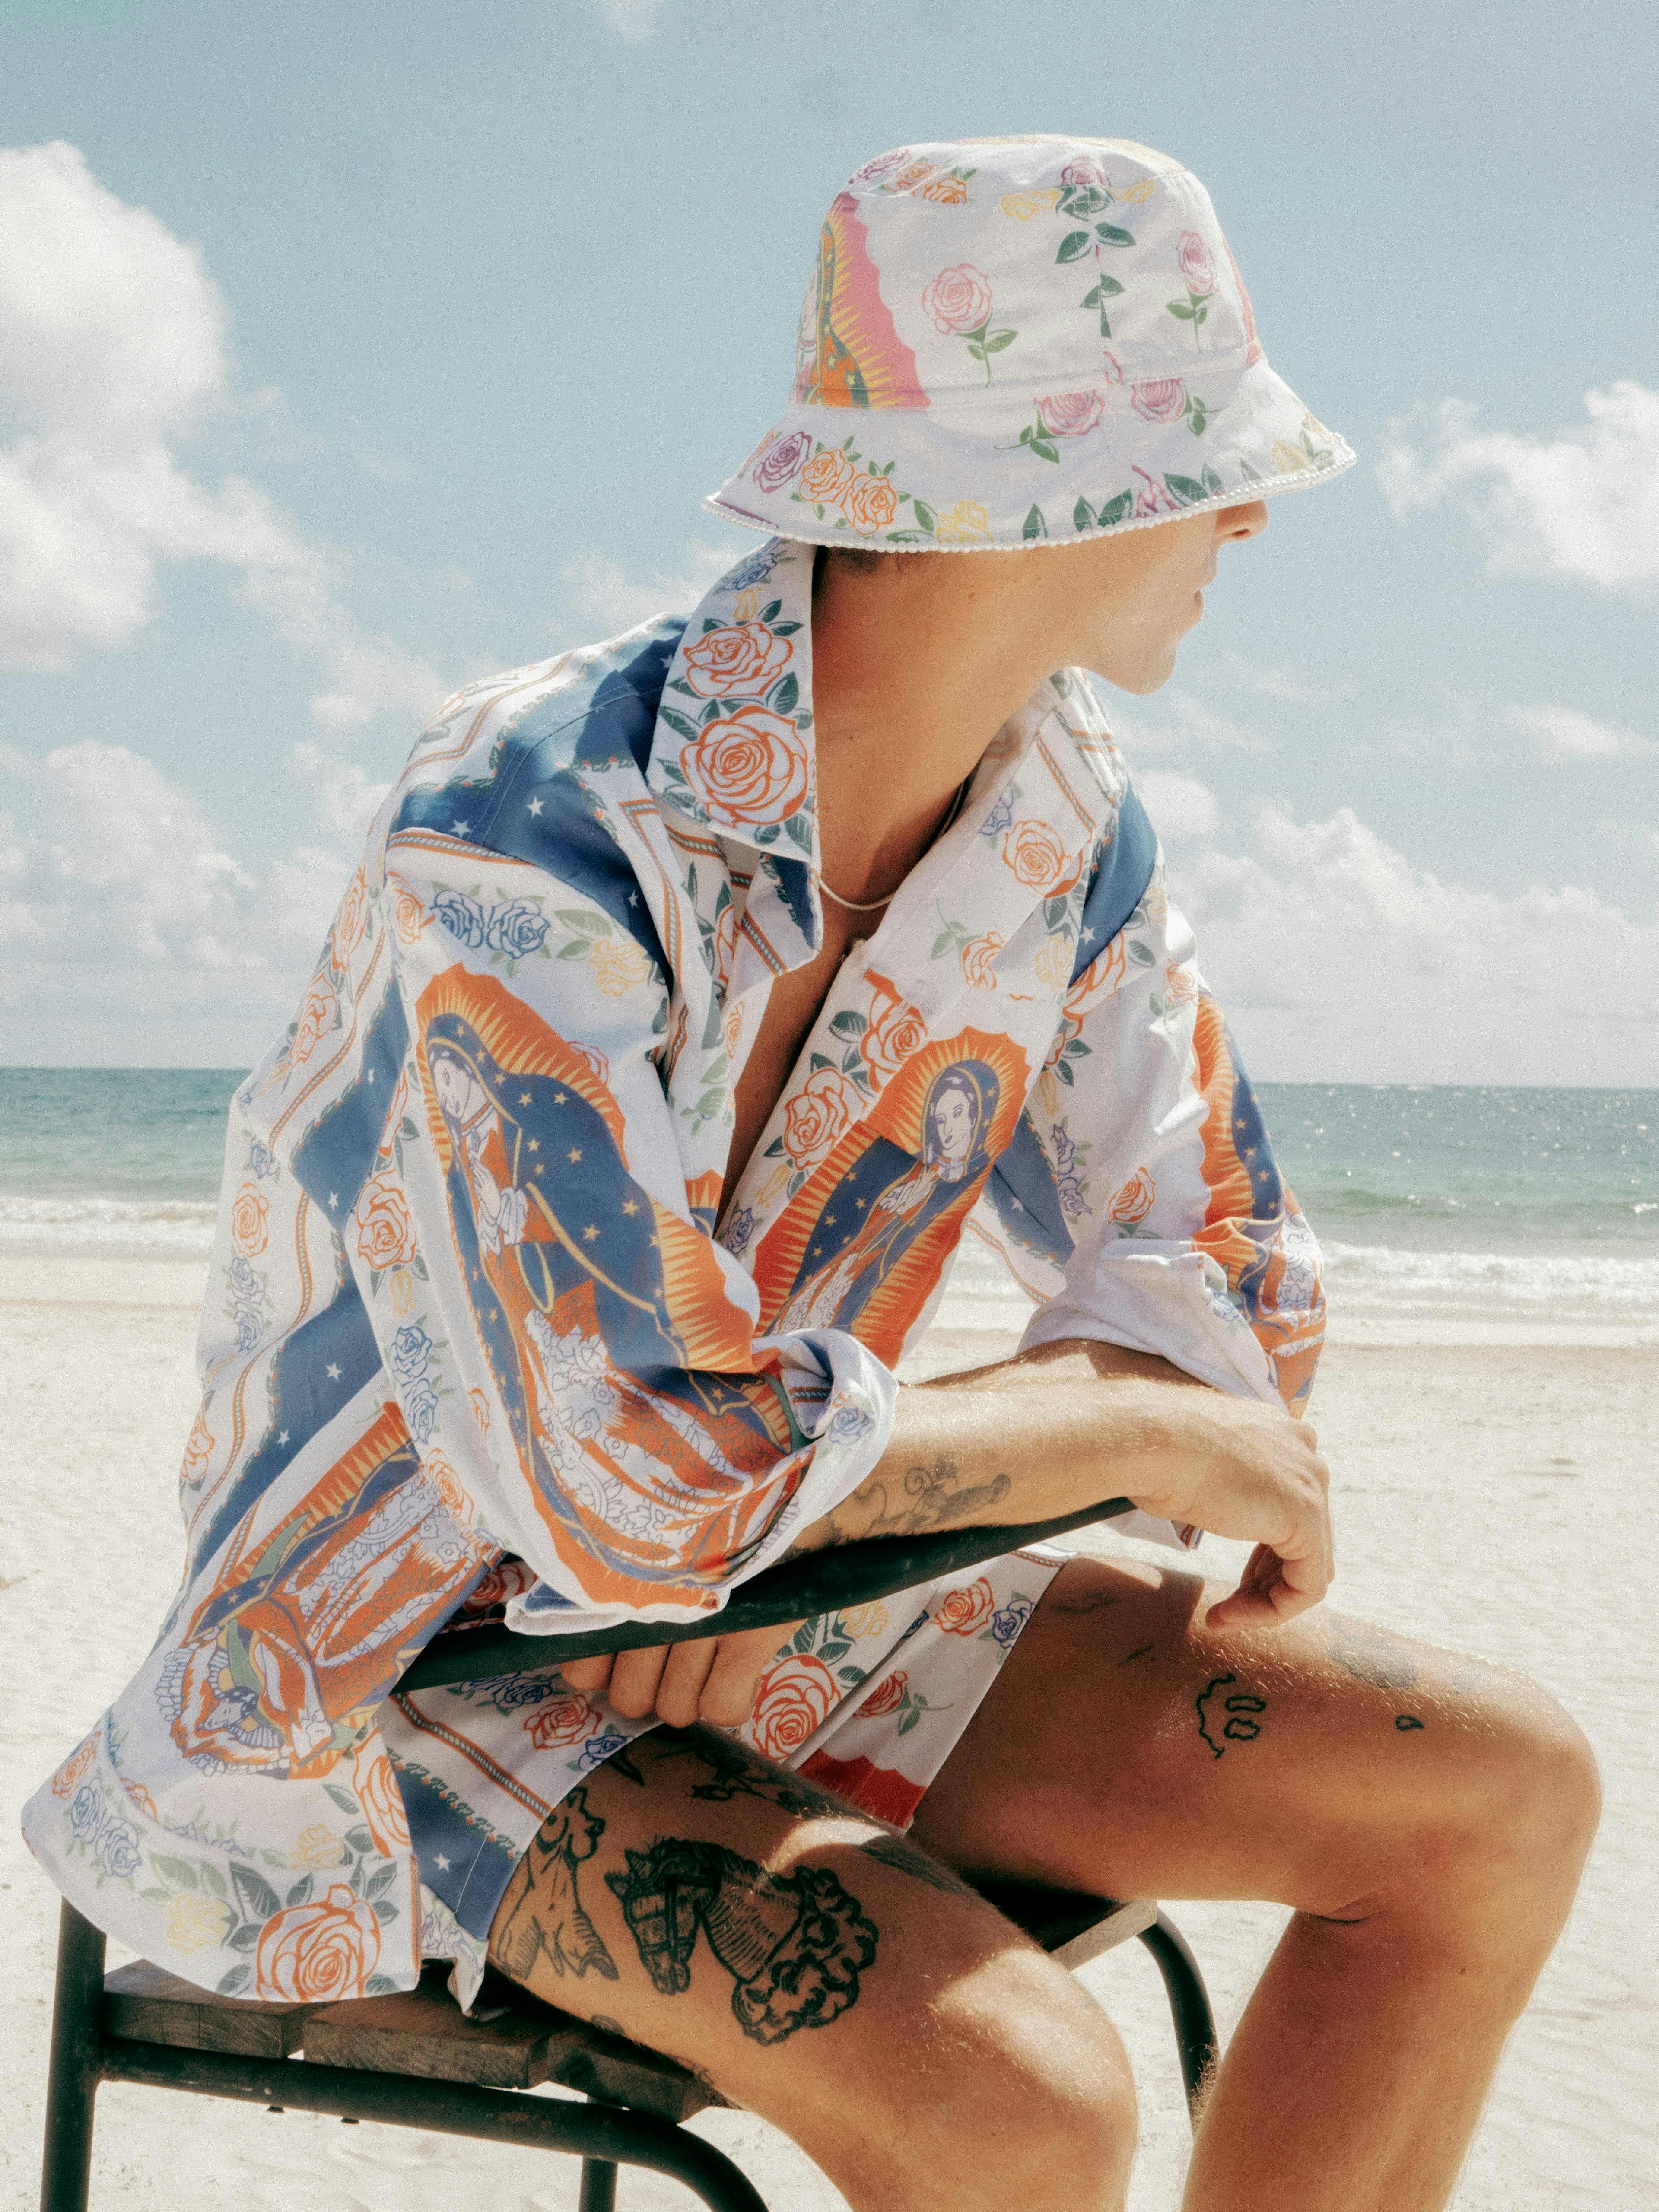 clothing apparel hat robe fashion person human sun hat gown